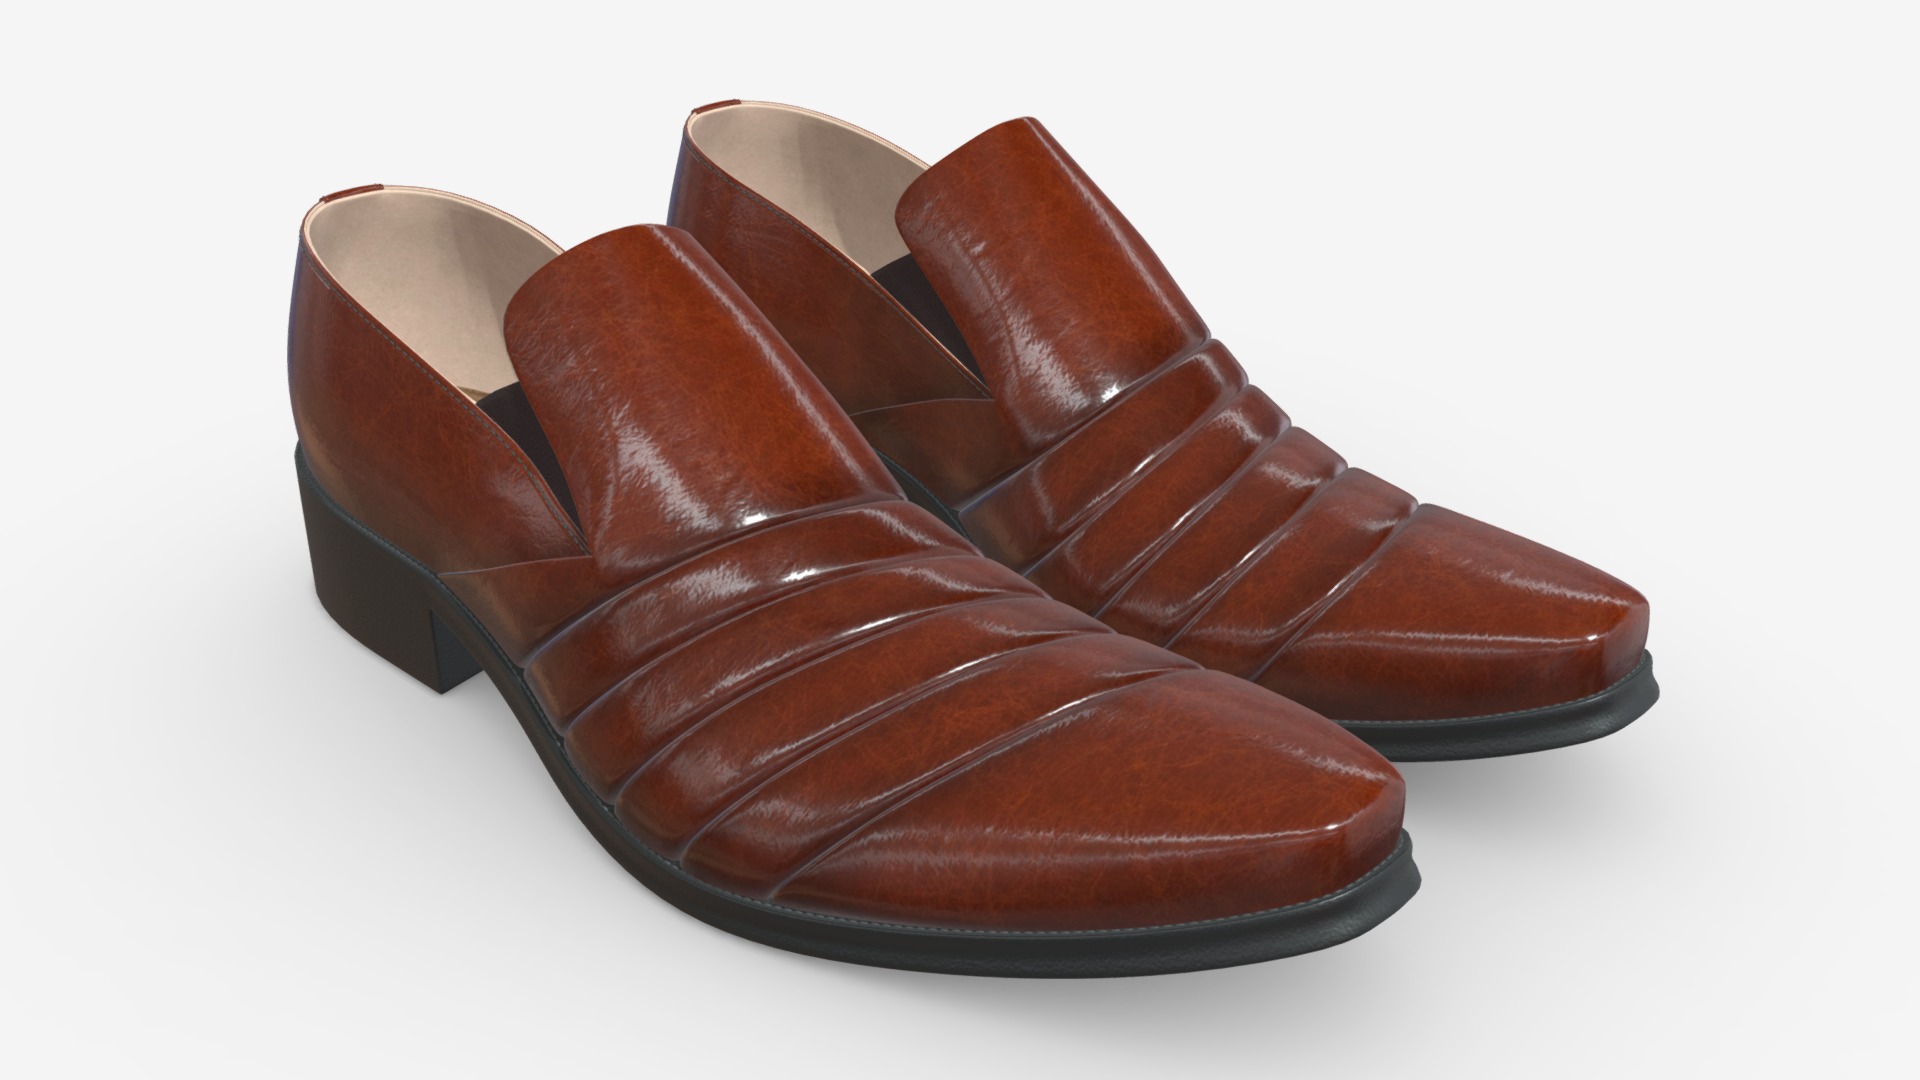 3D model Mens classic shoes 01 - This is a 3D model of the Mens classic shoes 01. The 3D model is about a pair of brown sandals.